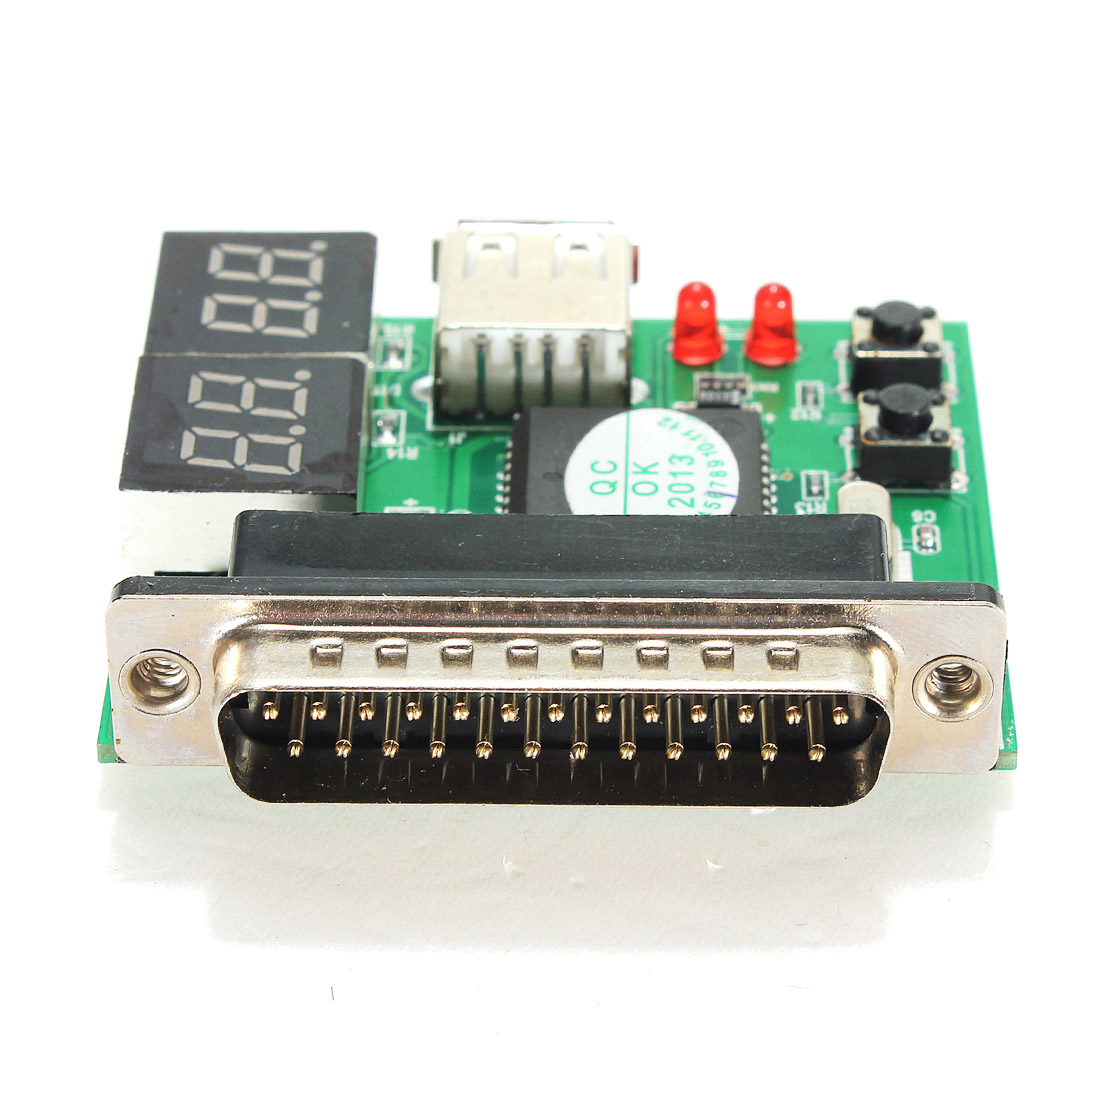 3pcs-Computer-Accessories-PC-Diagnostic-Card-USB-Post-Card-Motherboard-Analyzer-Tester-for-Notebook--1550785